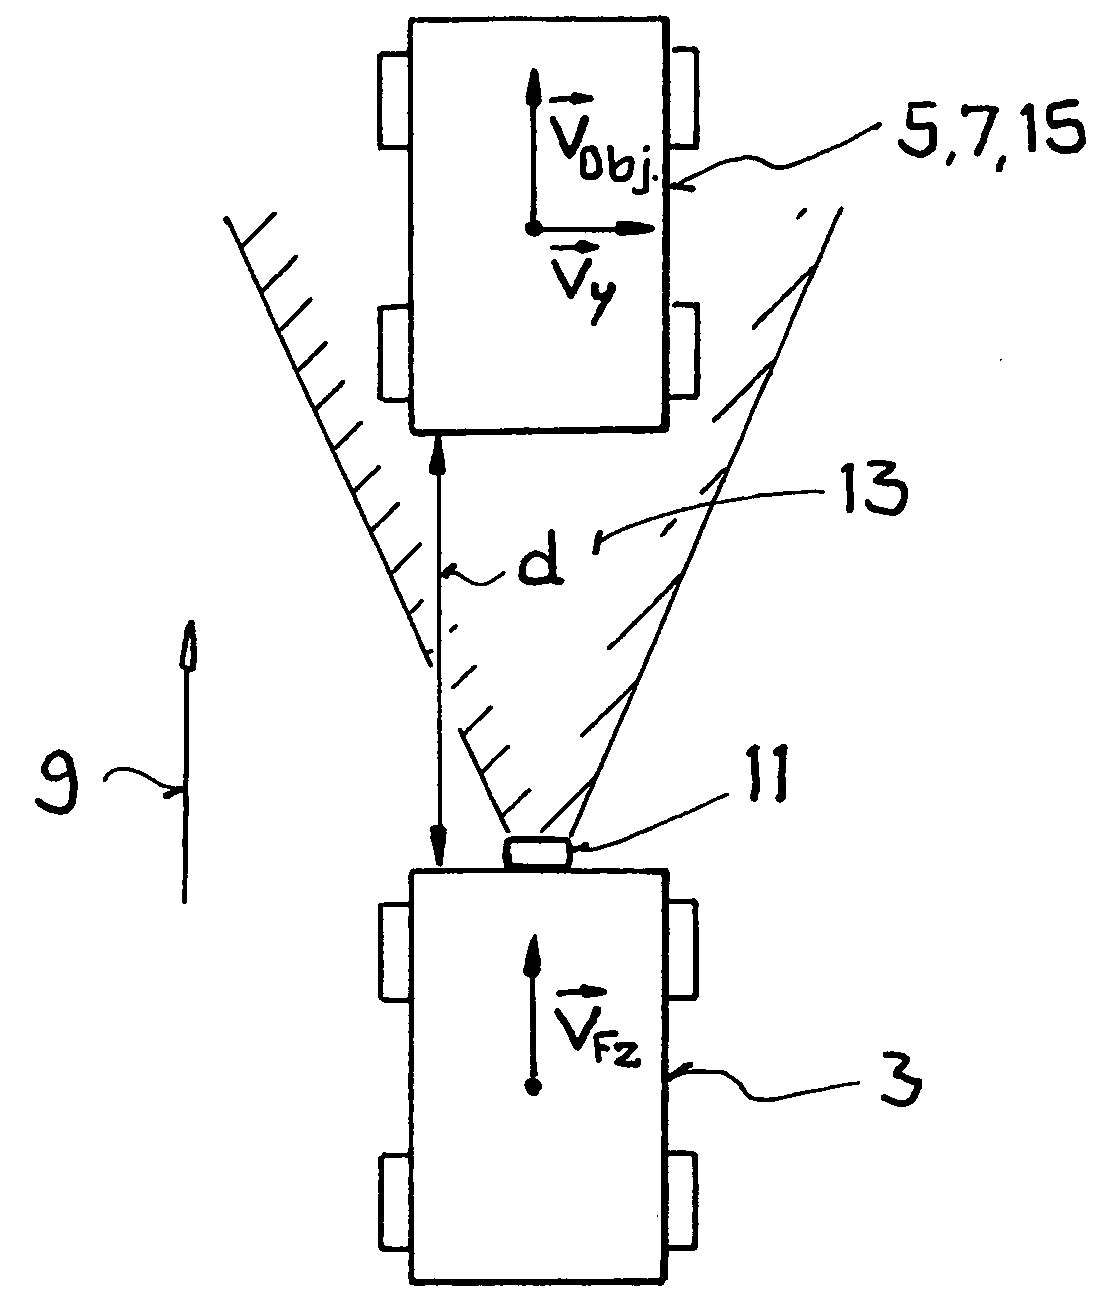 Method for selecting a target vehicle